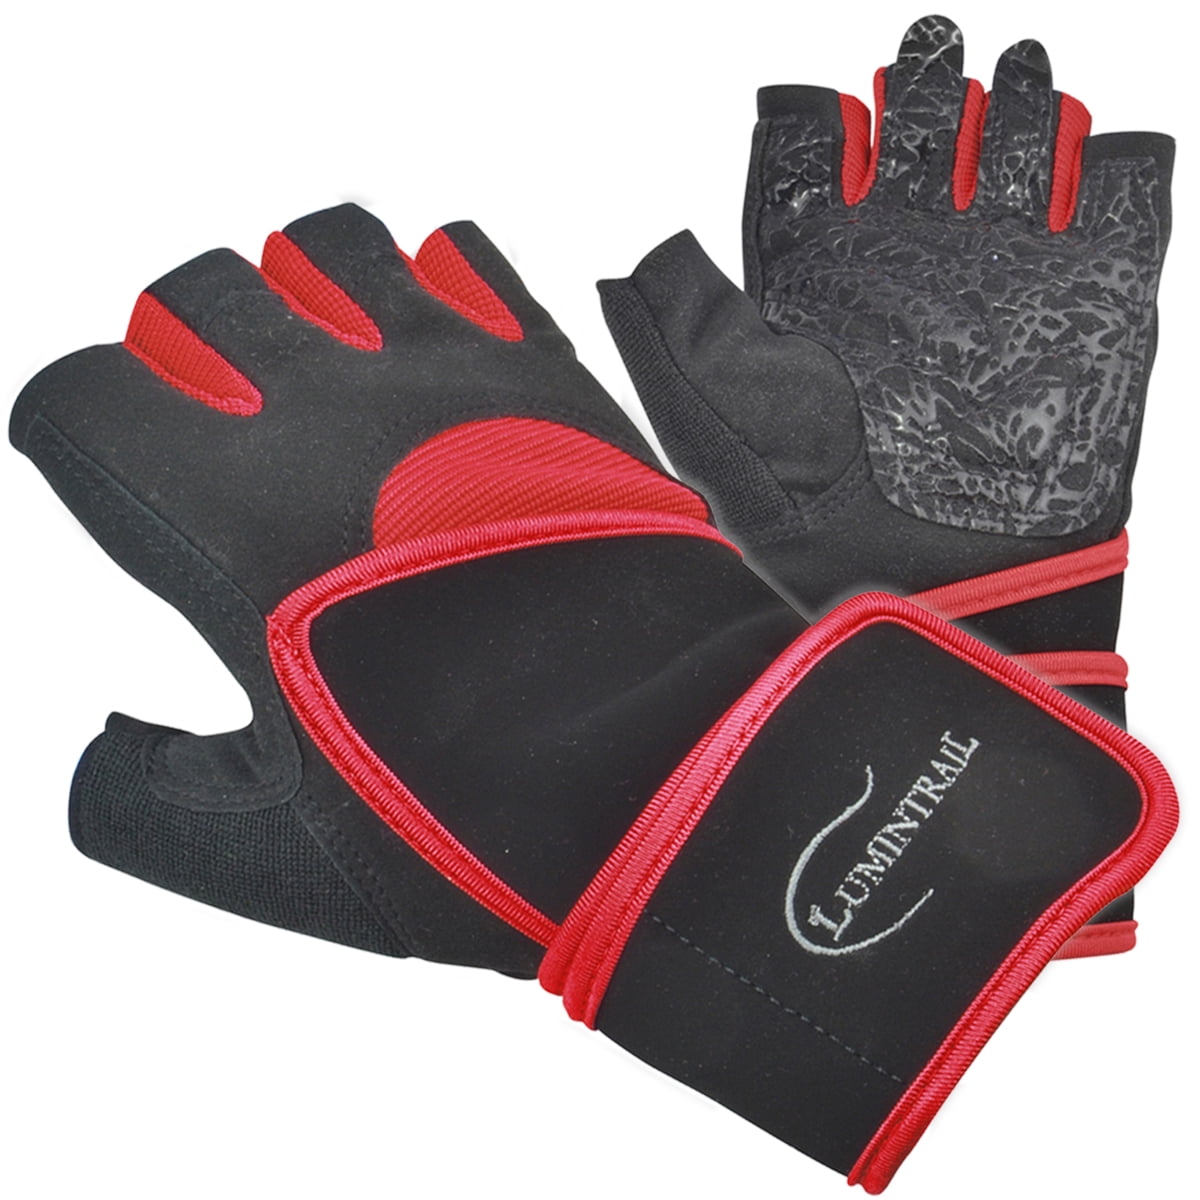 Unisex Half Finger Work Out Gloves Sport Weight Lifting Exercise Fitness Best 